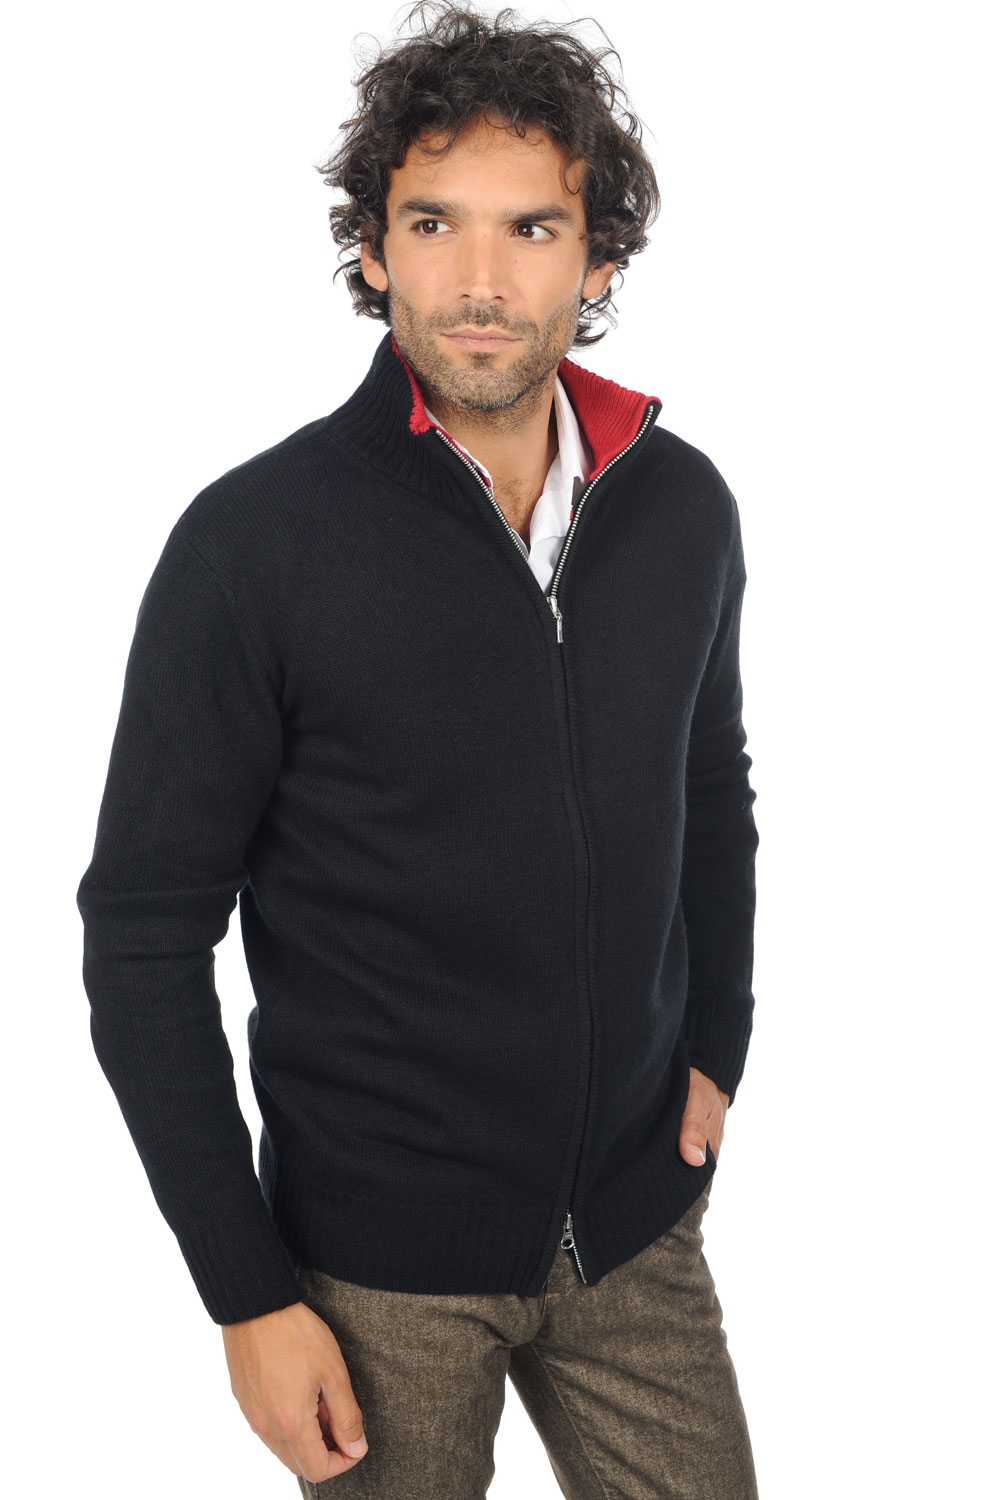 Cashmere men chunky sweater maxime black blood red m